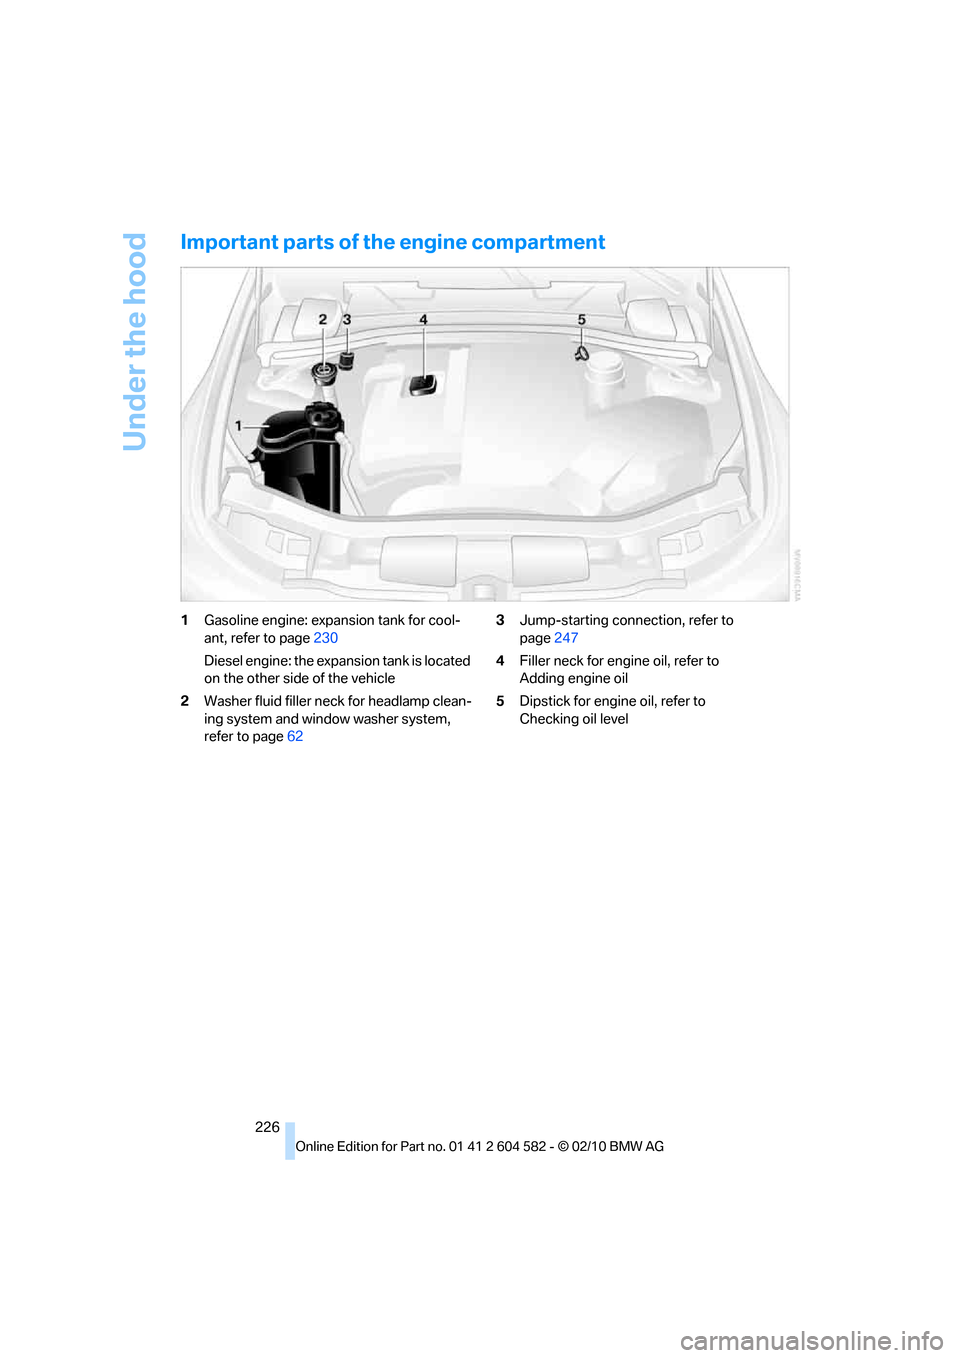 BMW 328I 2011 E90 Service Manual Under the hood
226
Important parts of the engine compartment
1Gasoline engine: expansion tank for cool-
ant, refer to page230
Diesel engine: the expansion tank is located 
on the other side of the veh